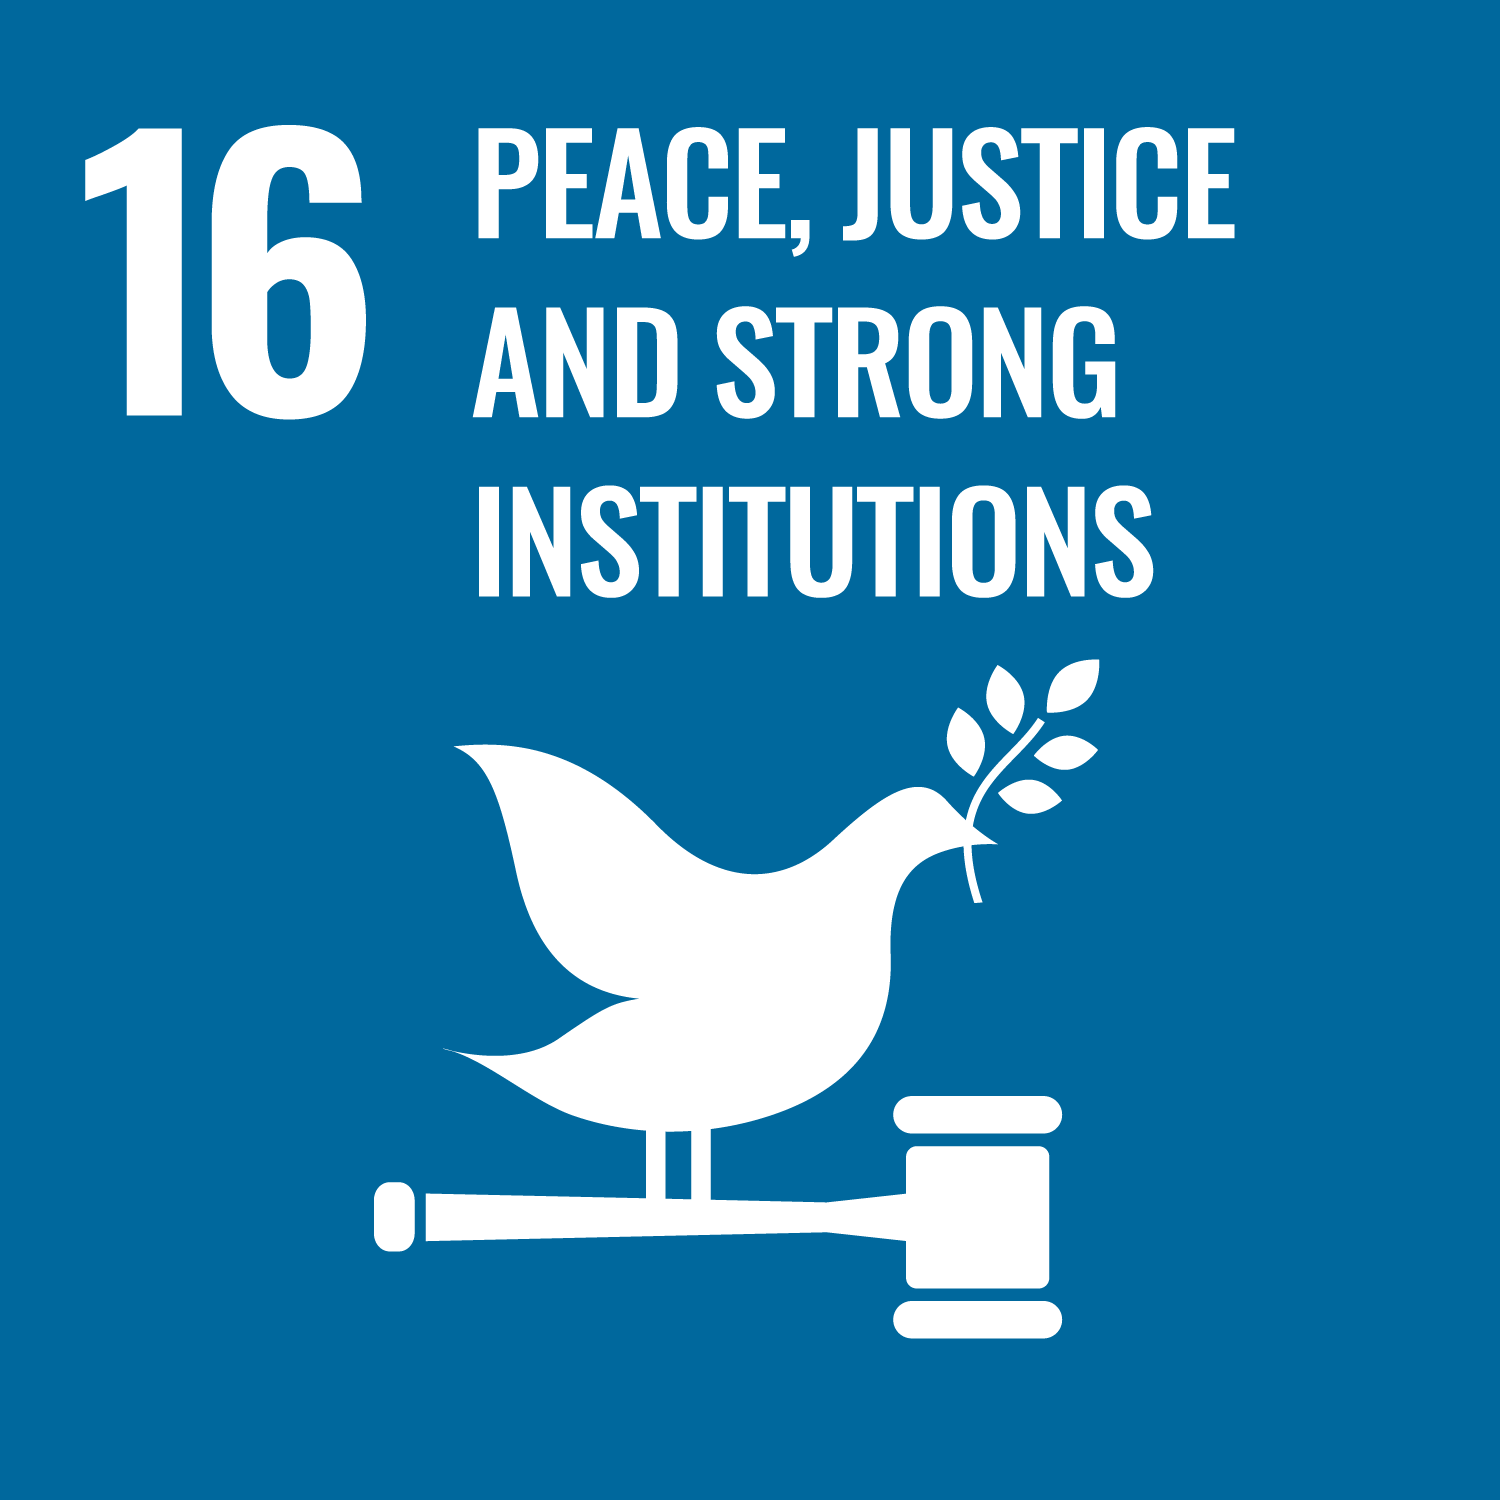 sustainable-development-goals-peace-justice-and-strong-institutions